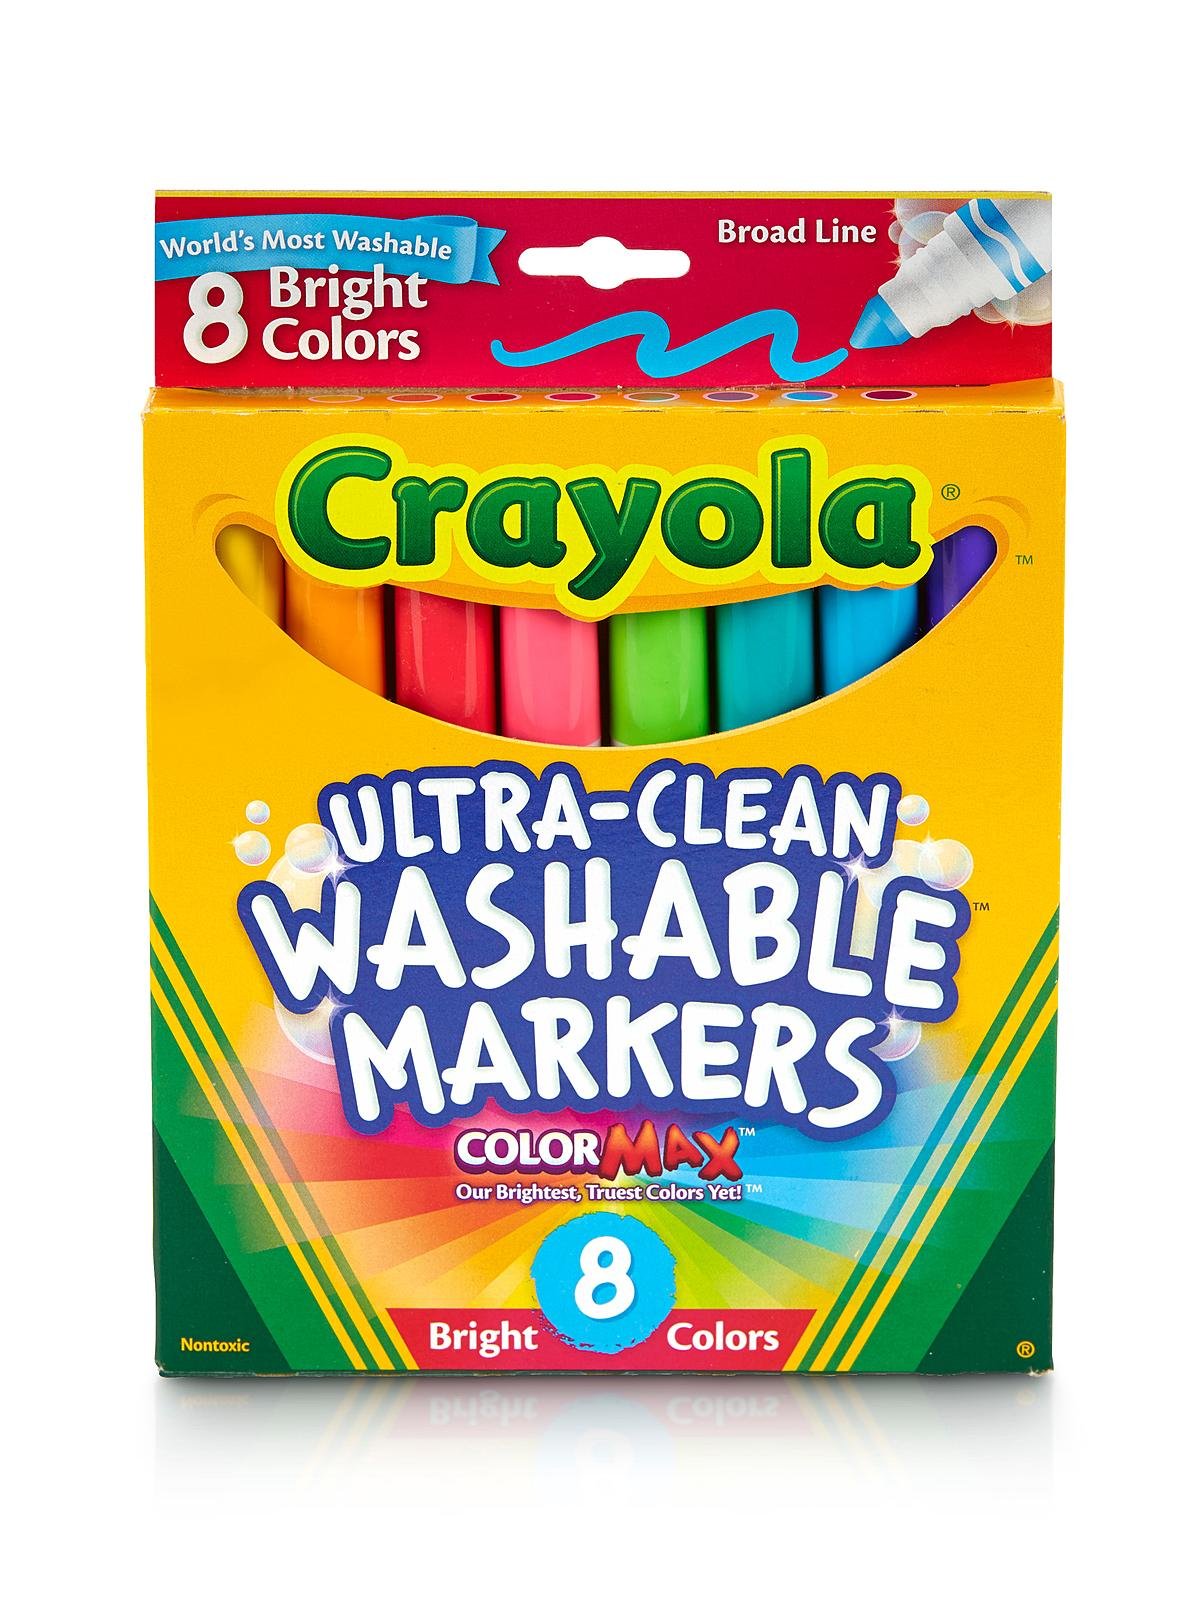 Crayola Bright Colors Ultra-clean Washable Markers